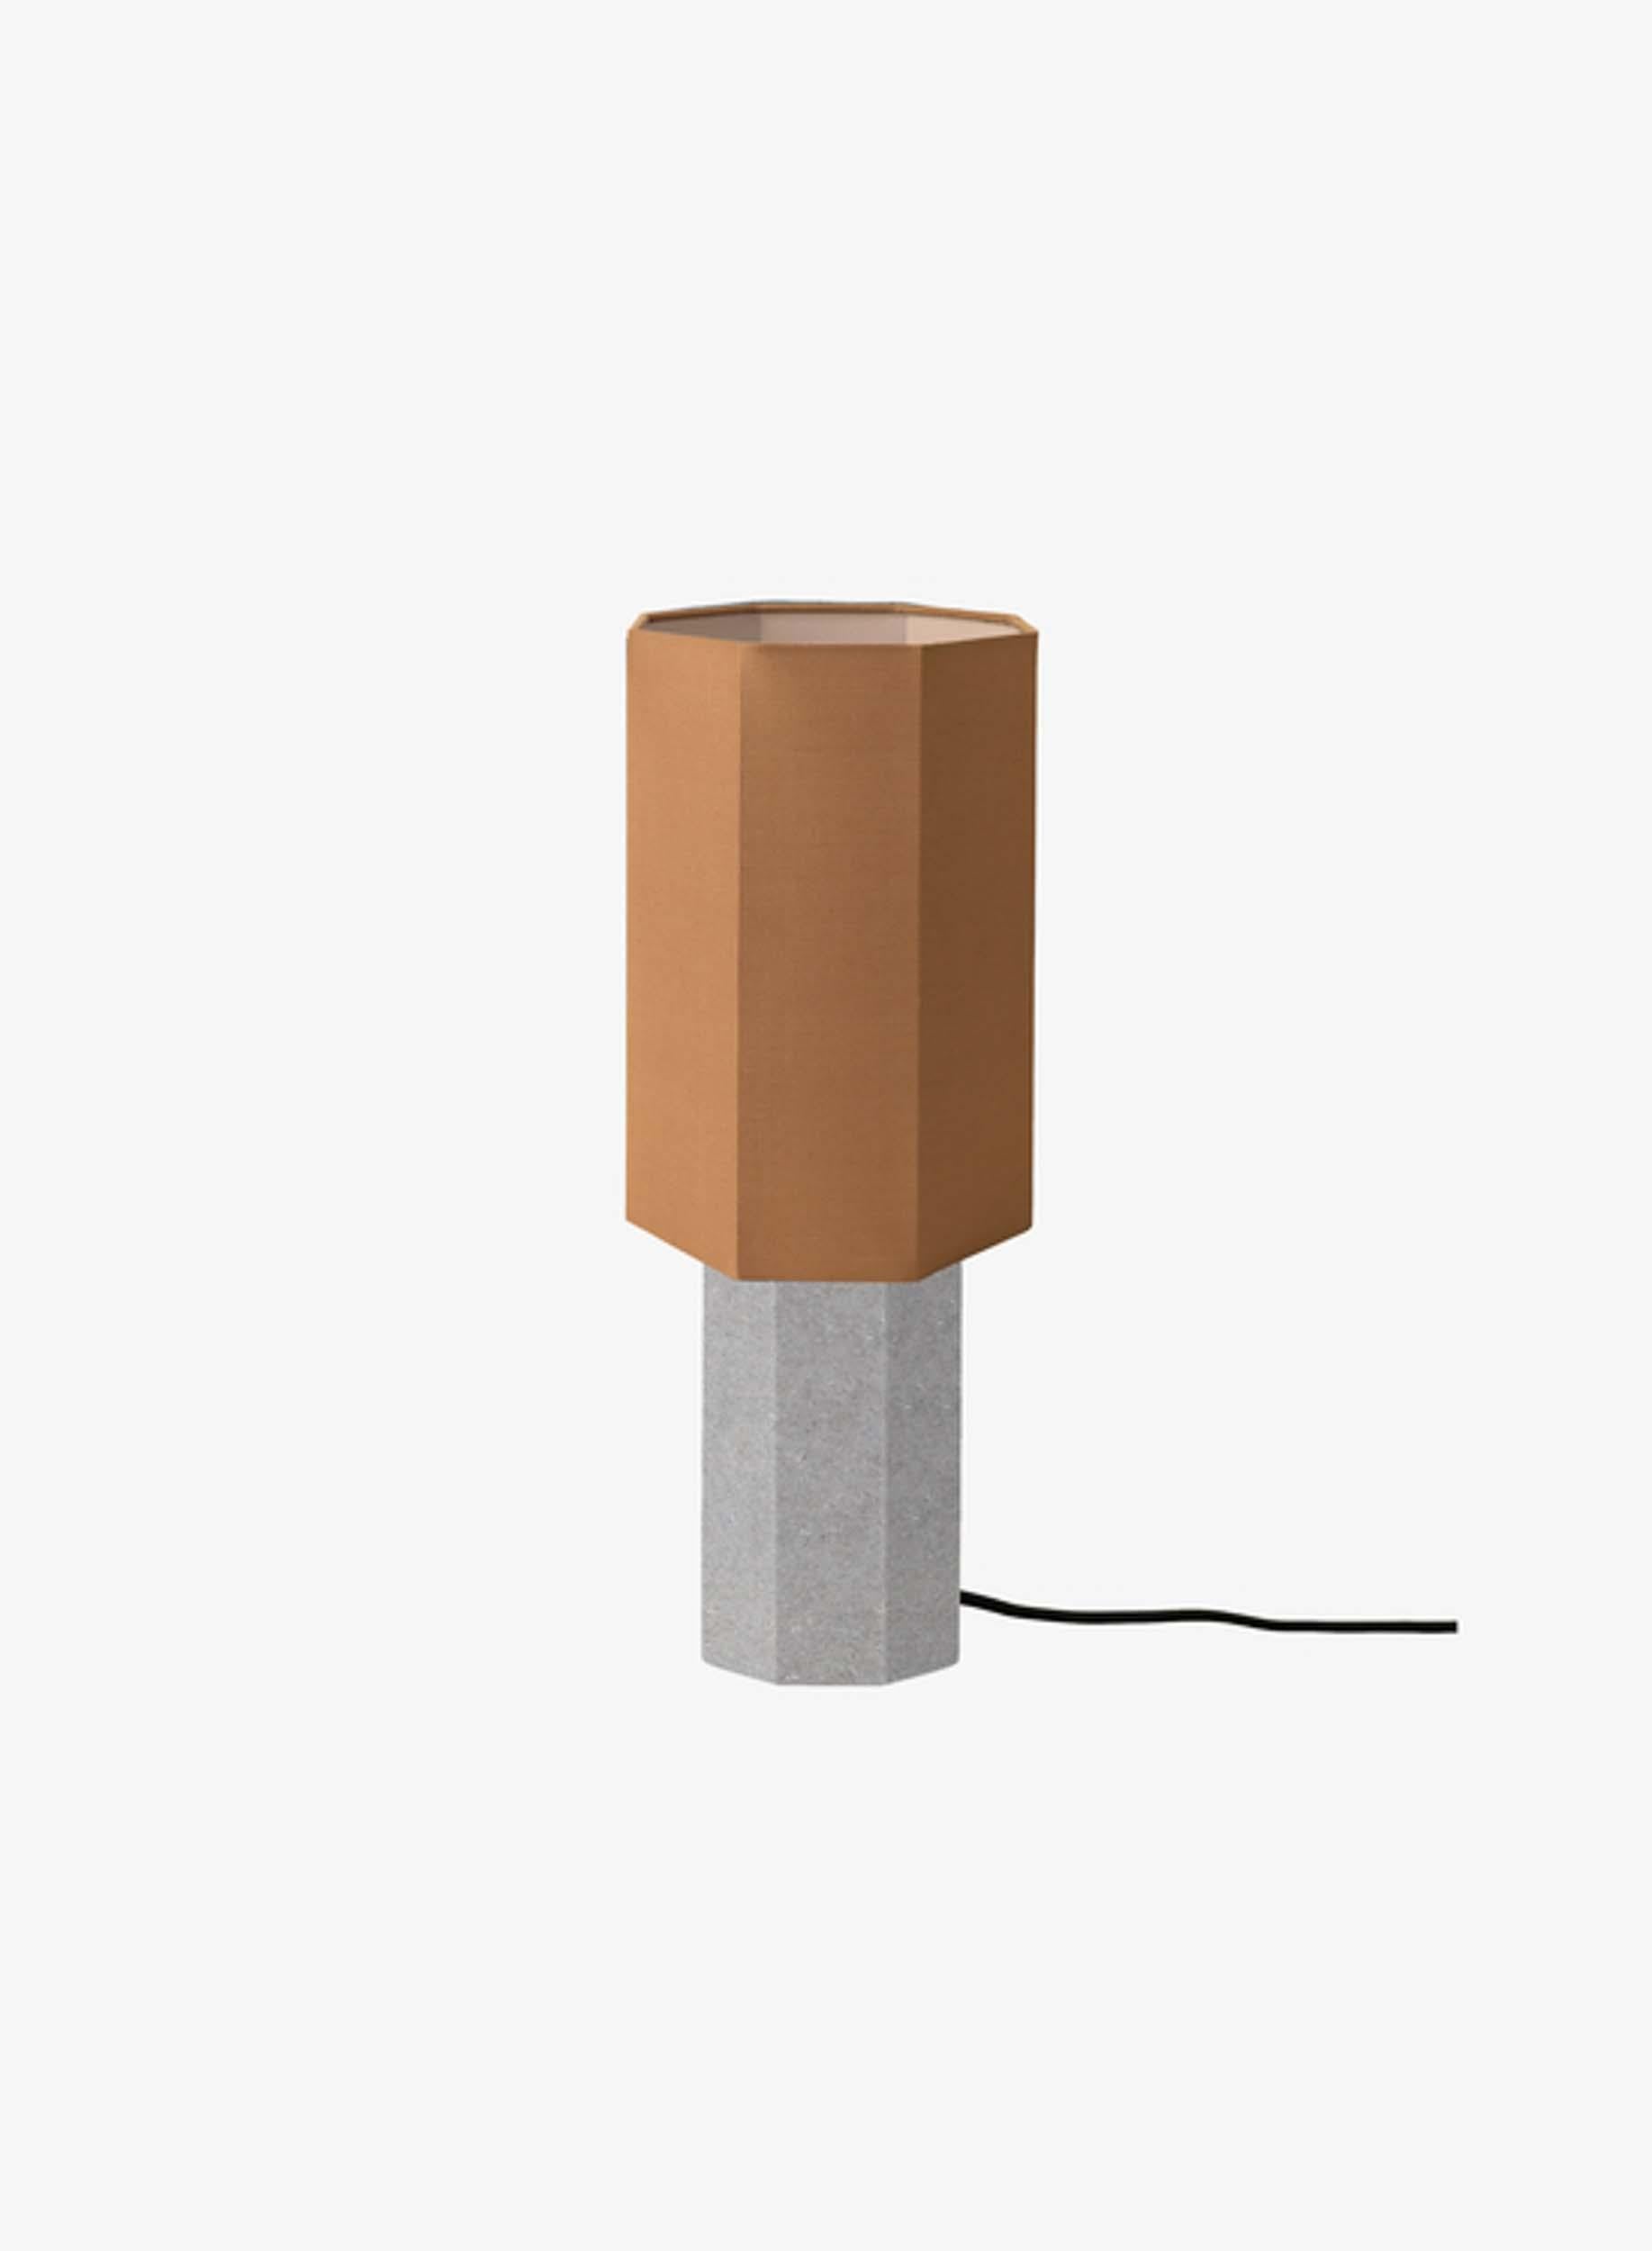 Table Lamp 'The Eight over Eight' by Louise Roe 

Designed in Denmark and manufactured in Italy.

Model shown in the picture: 
Base: Grey marble
Lampshade: ocher 

Dimensions : 
Height: 36 cm
Diameter: 12.5 cm

Louise Roe is a Copenhagen